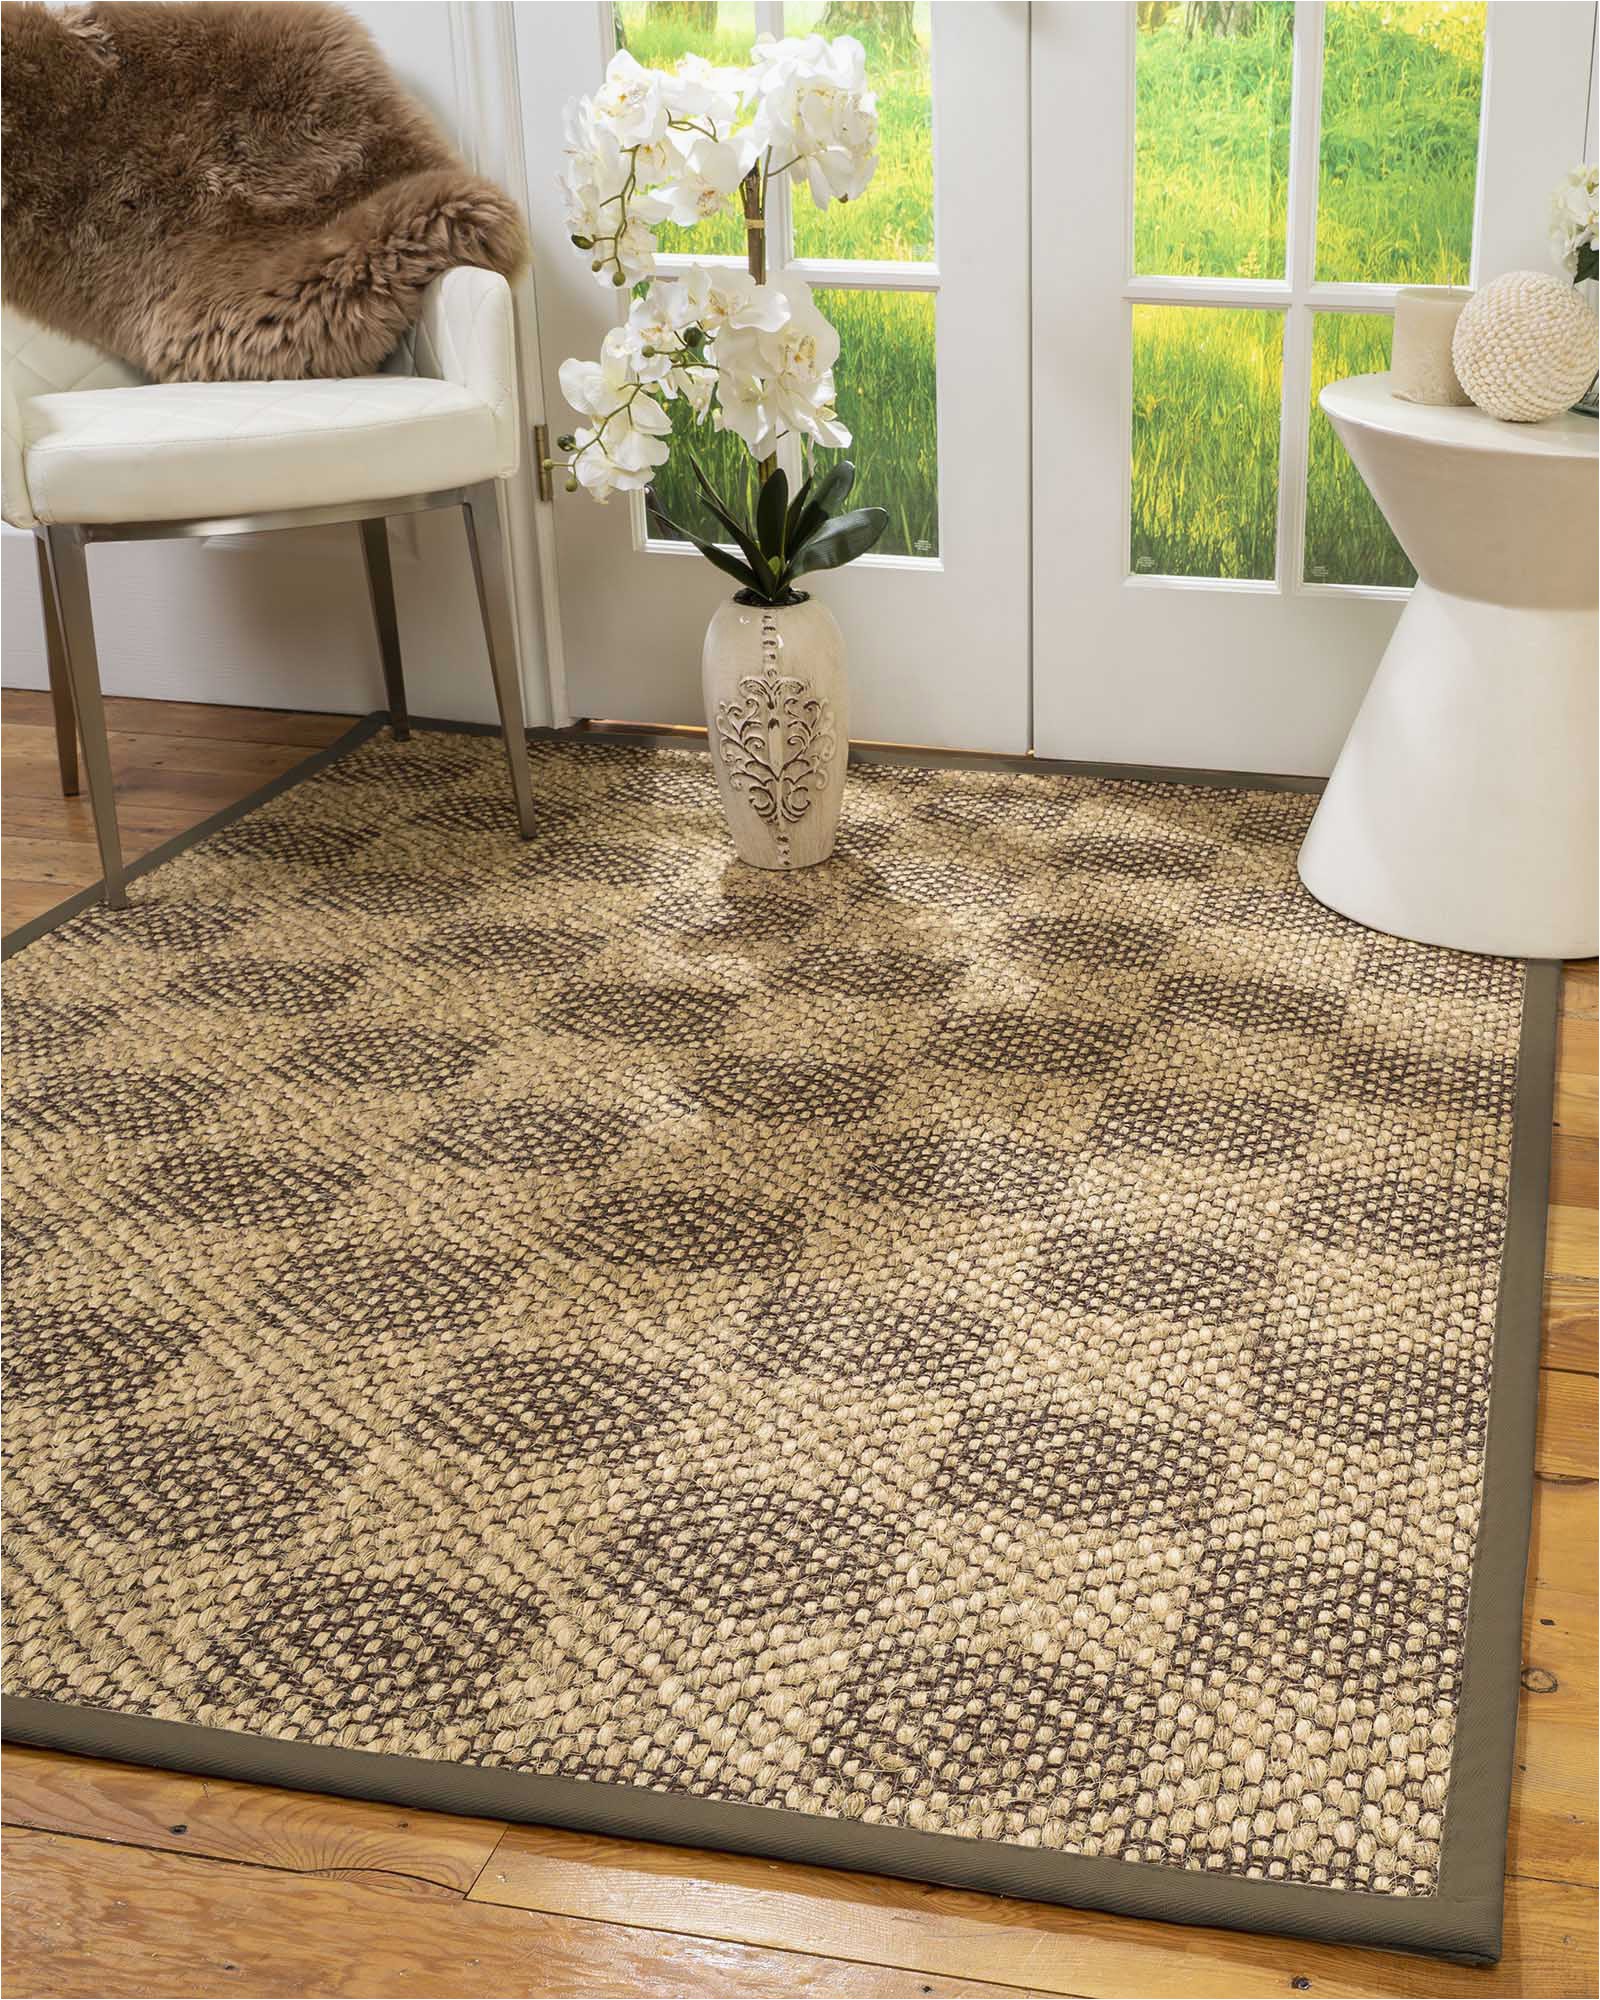 5 by 7 area Rugs at Walmart Natural area Rugs Parson Custom Sisal Rug 5 X 7 Fossil Border